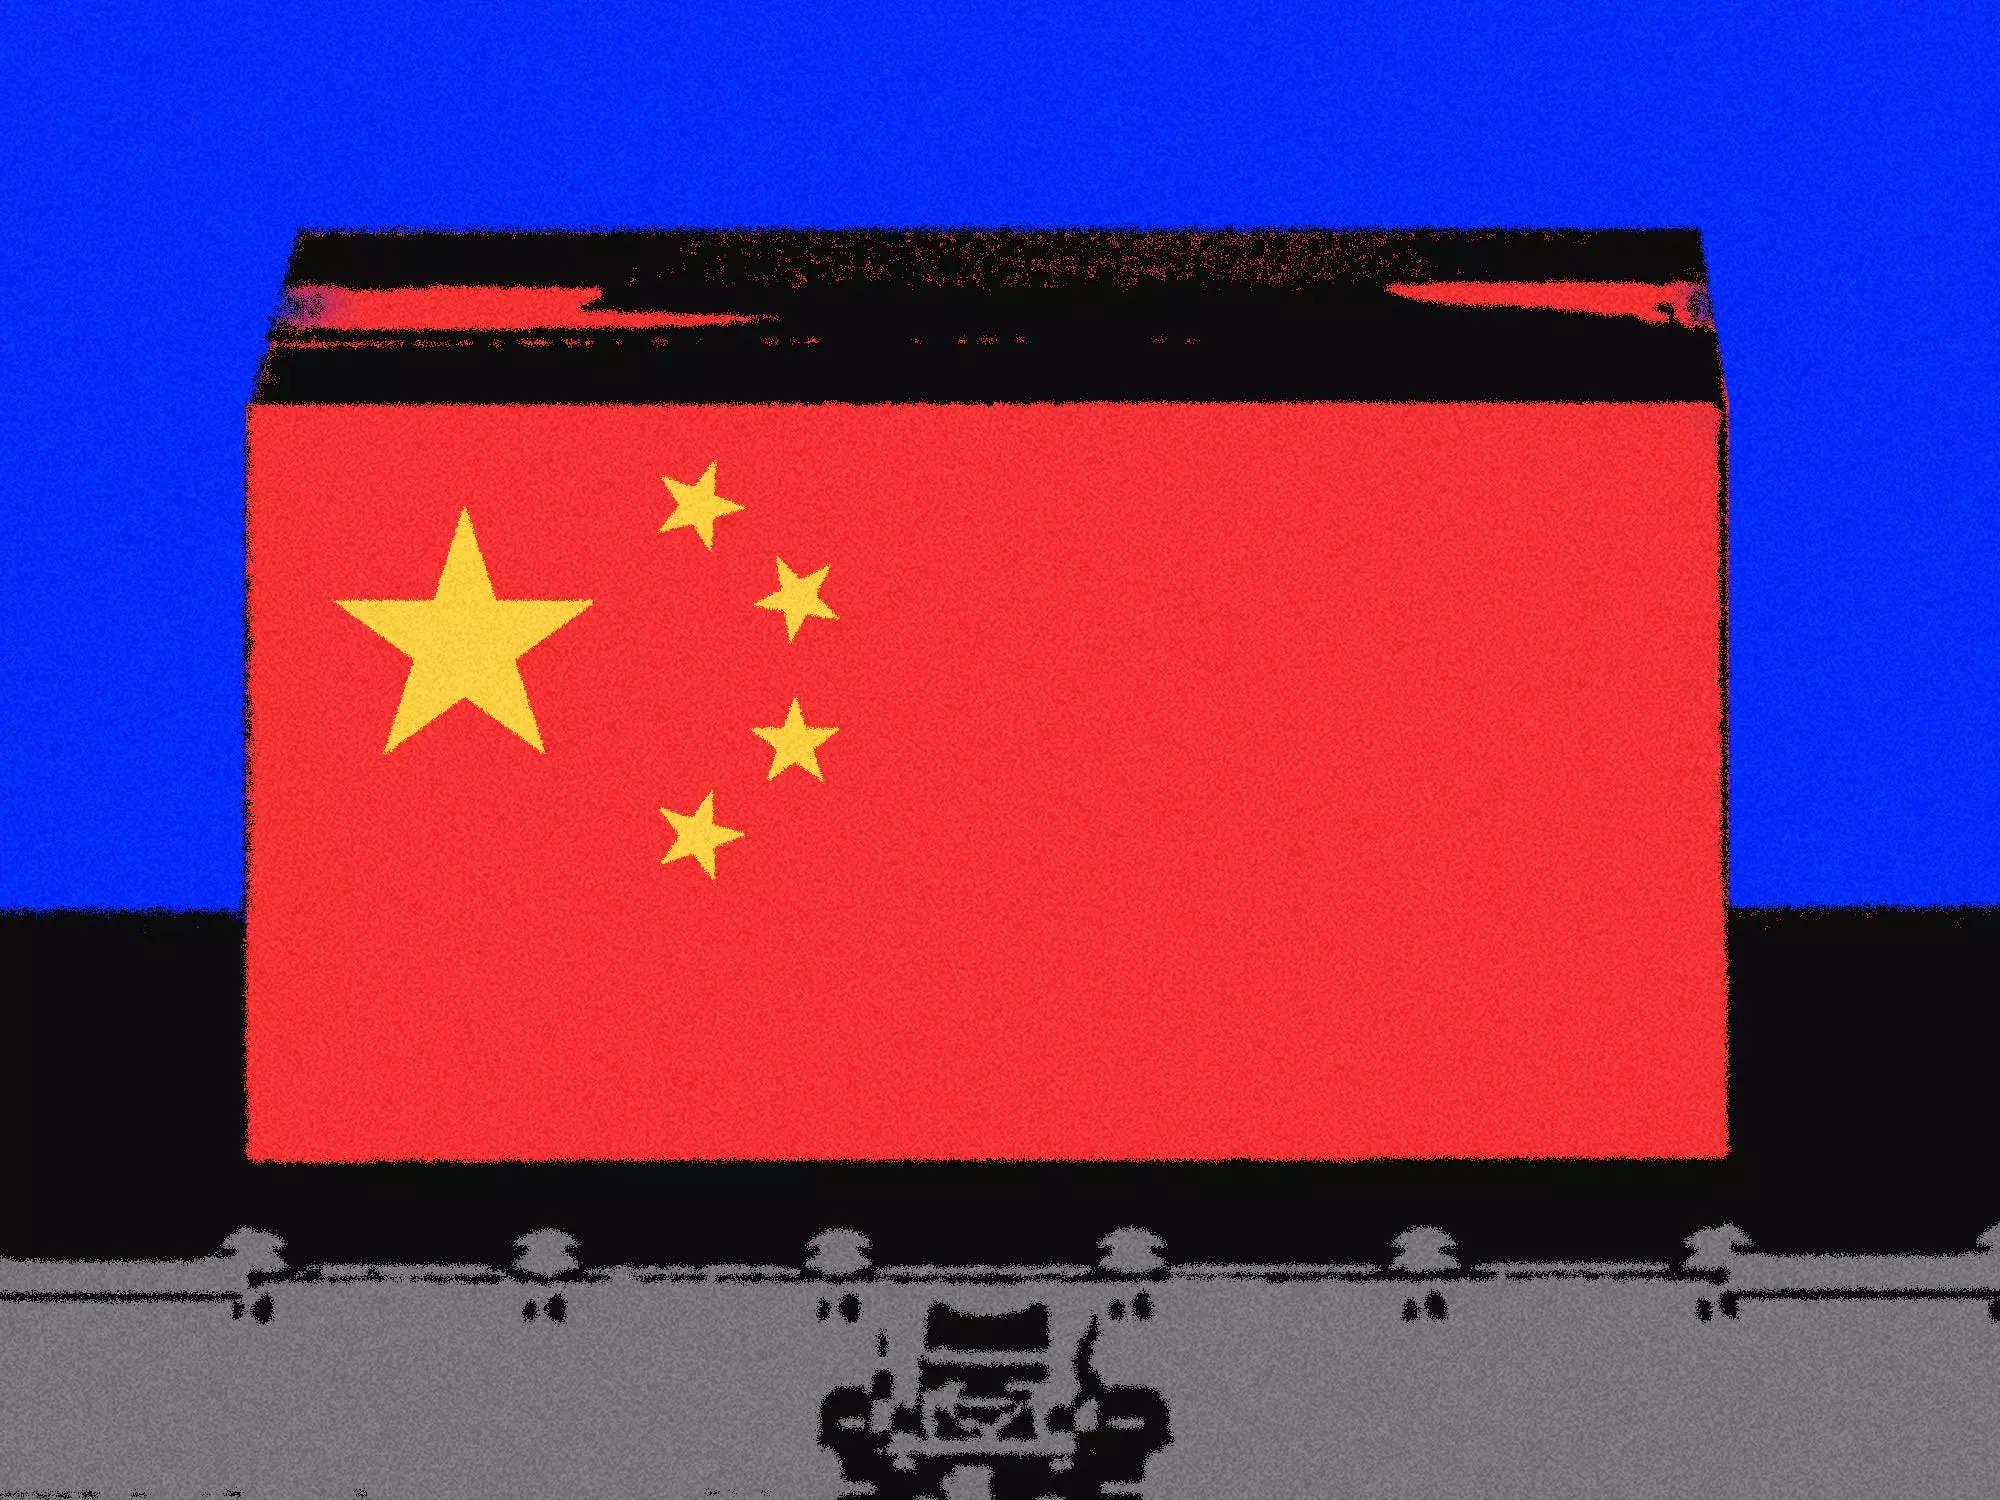 A box on an assembly line with the China flag on it